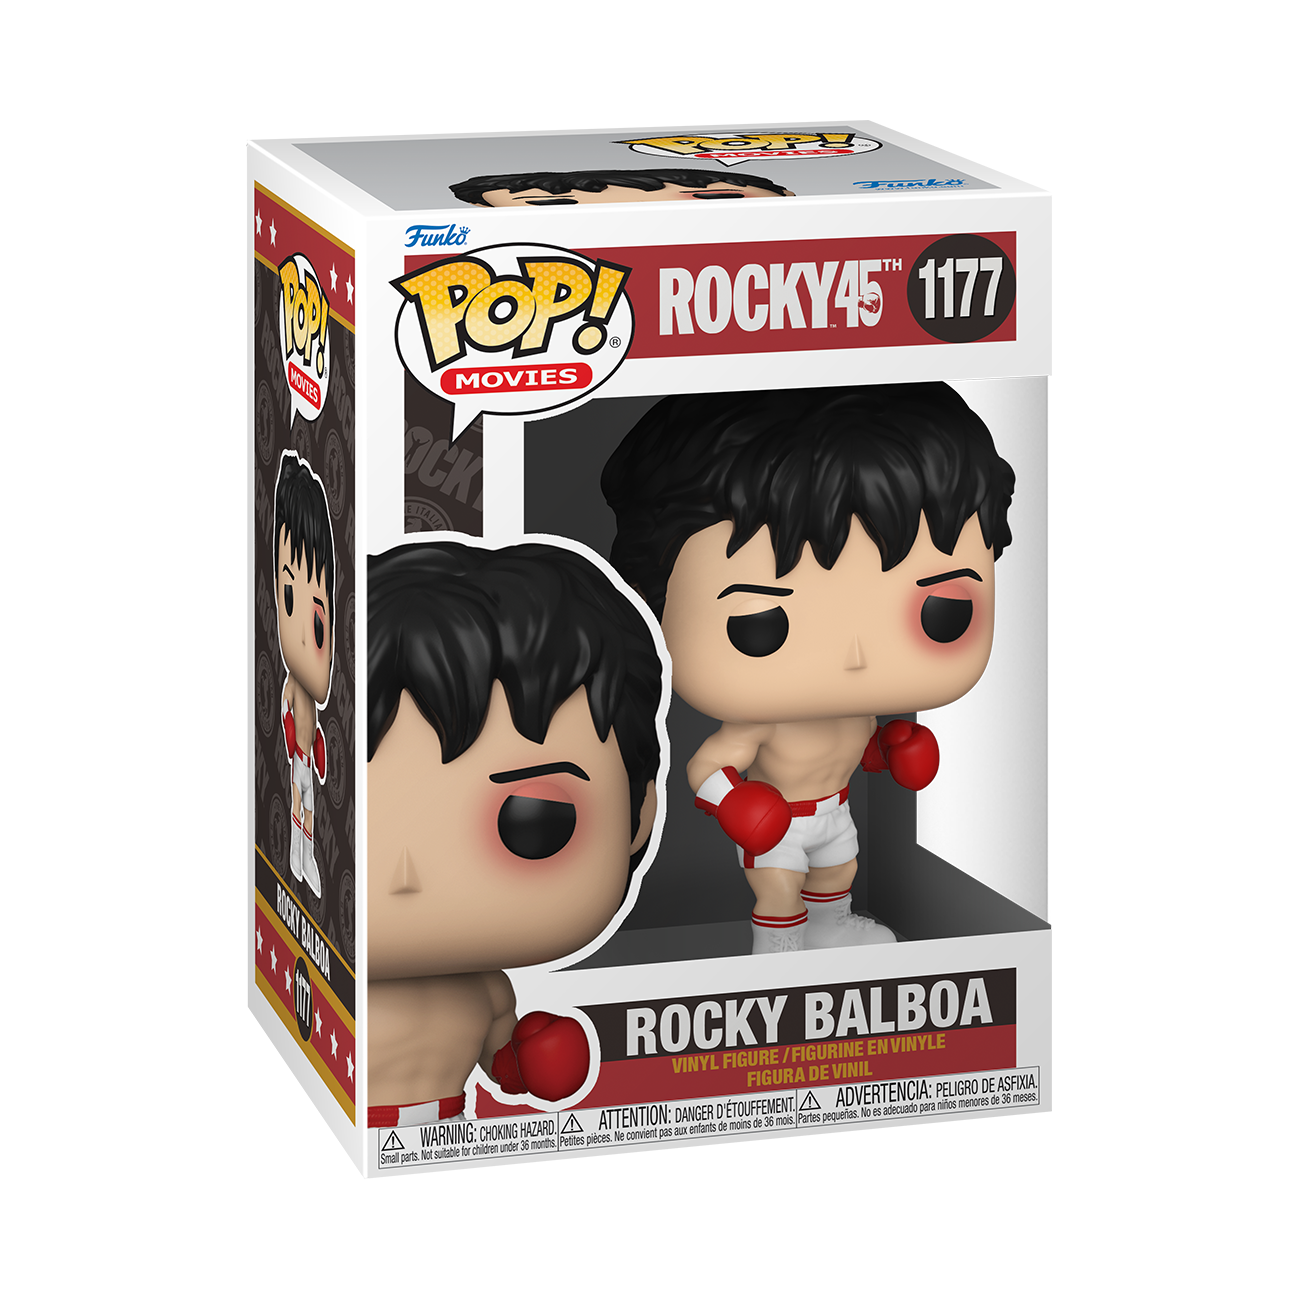  ROCKY BALBOA FUNKO POP! MOVIES 45TH ANNIVERSARY SYLVESTER STALLONE BOXING #1177</p><BR>In Stock<BR>In Stock Safety Information<br>Warning: Not suitable for children under 3 years. Small Parts. 